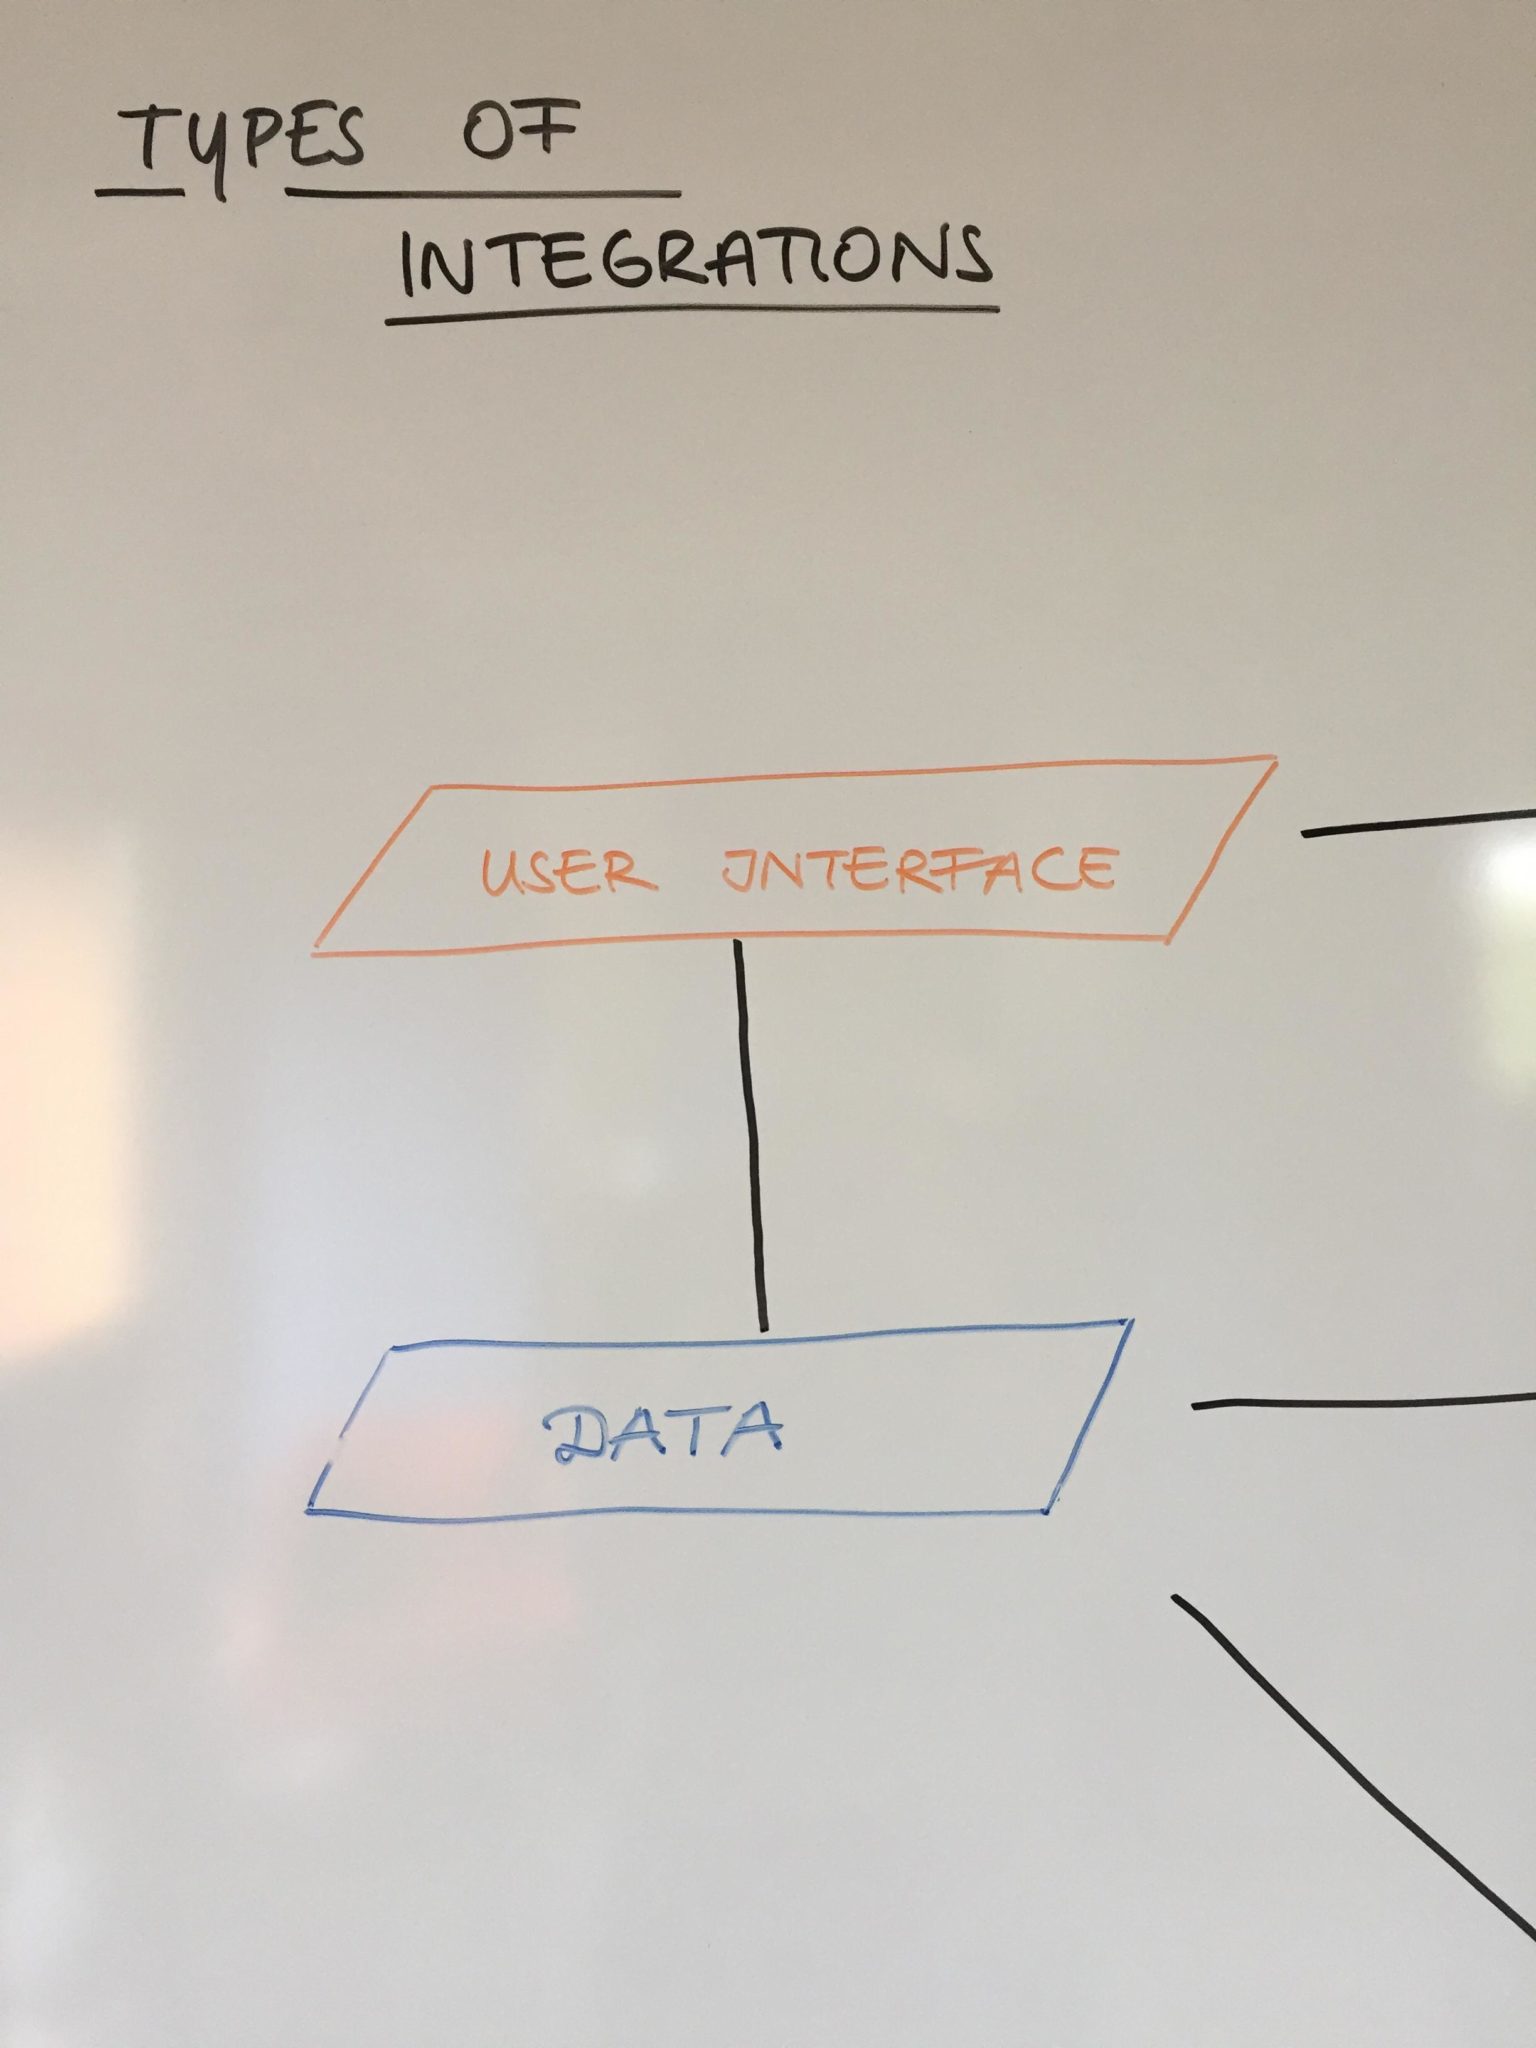 Types of Integrations